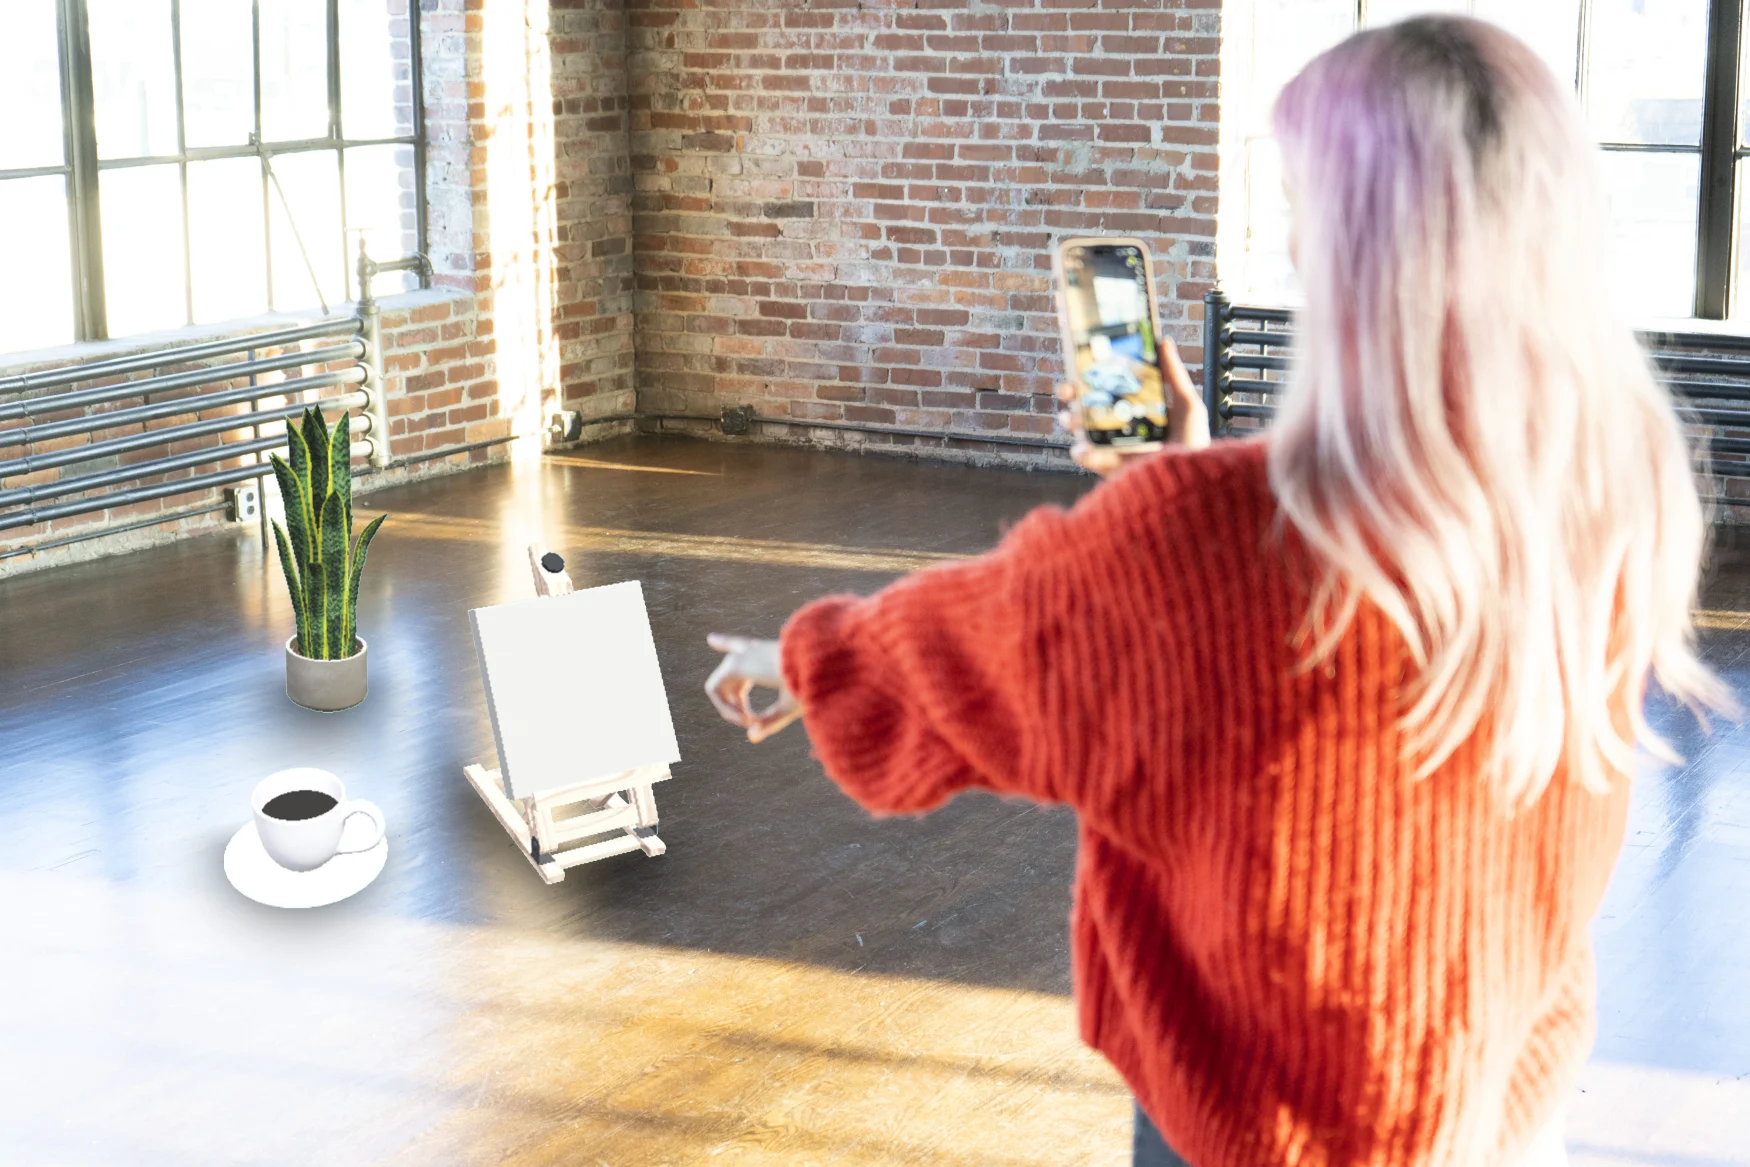 A woman wearing a red sweater in an apartment with brick walls points at virtual (AR) objects on the floor in front of her while holding a phone in AR view.